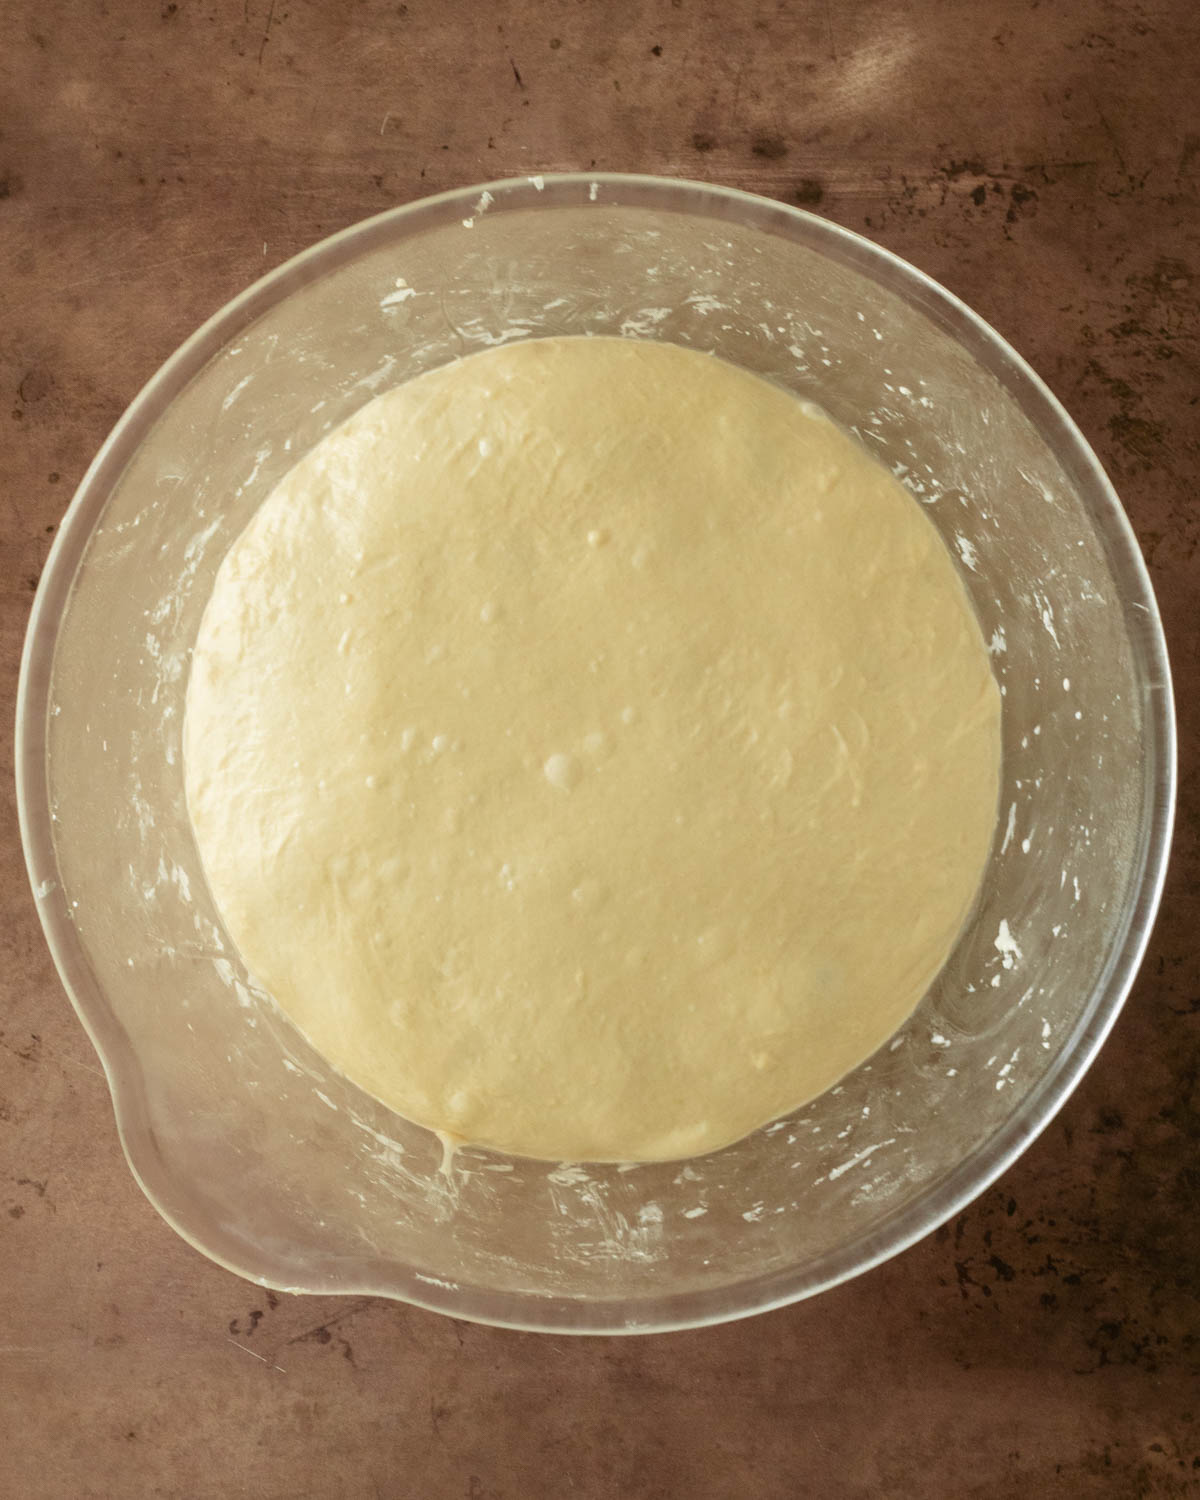 Step 9. Cover the dough then allow it to ferment for 12 hours